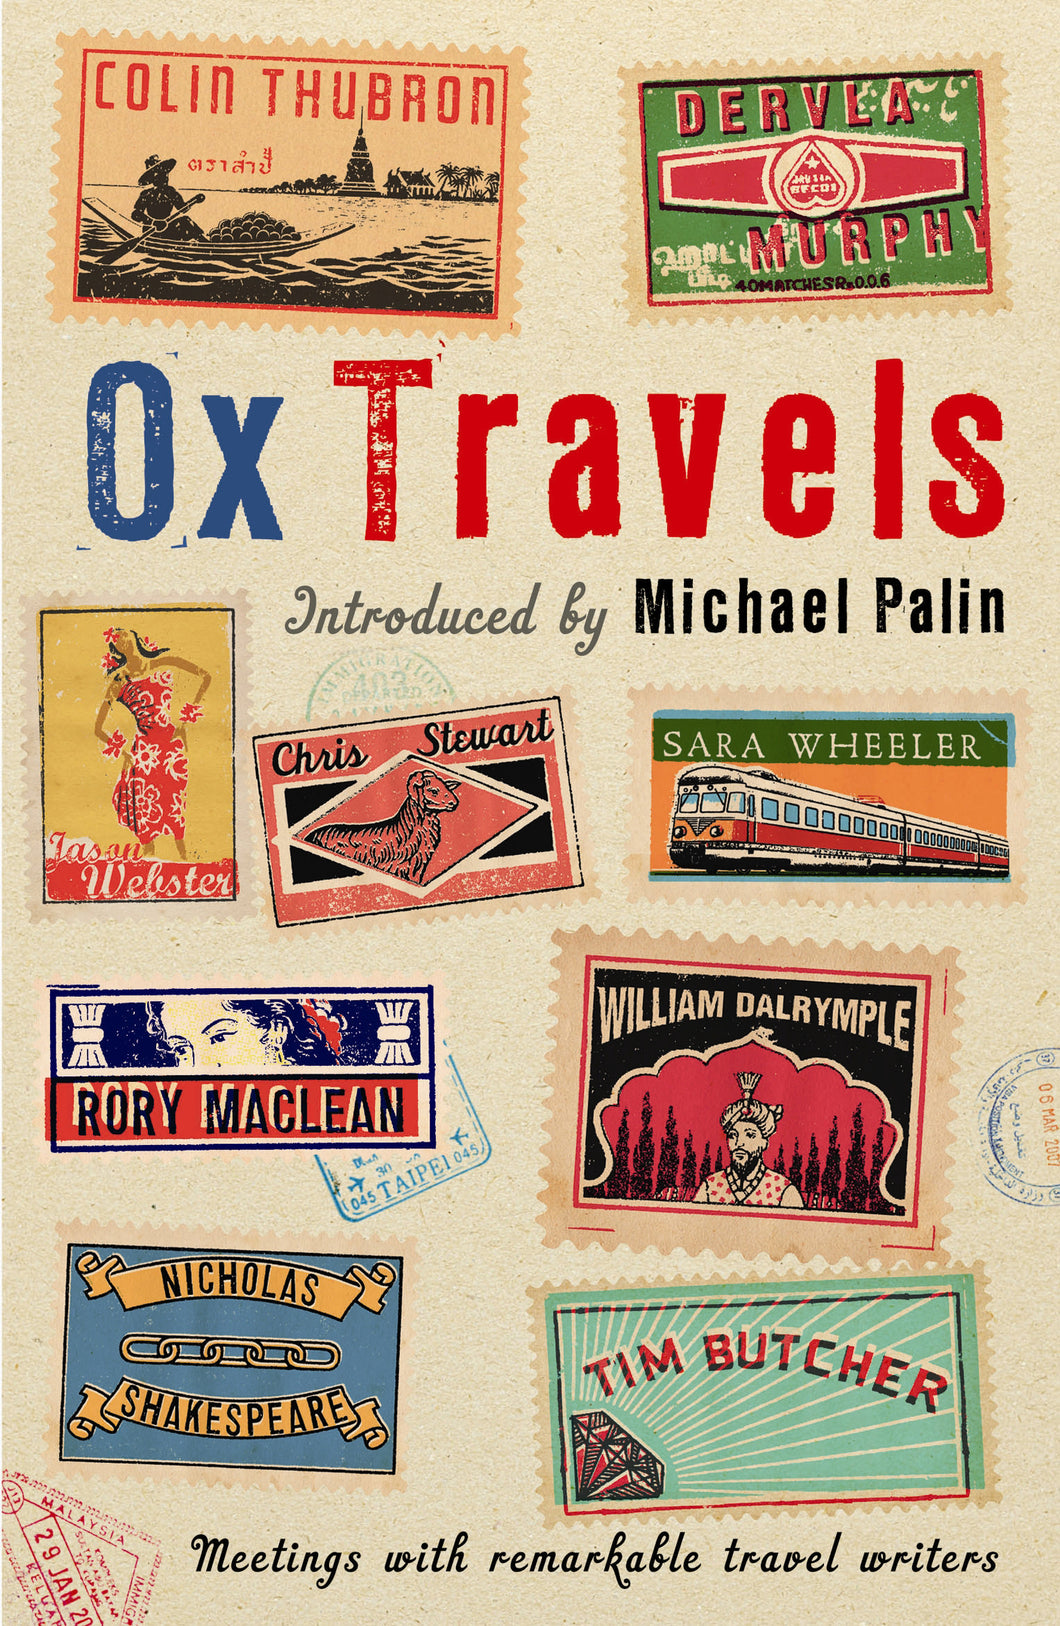 Ox Travels by Mark Ellingham: stock image of front cover.